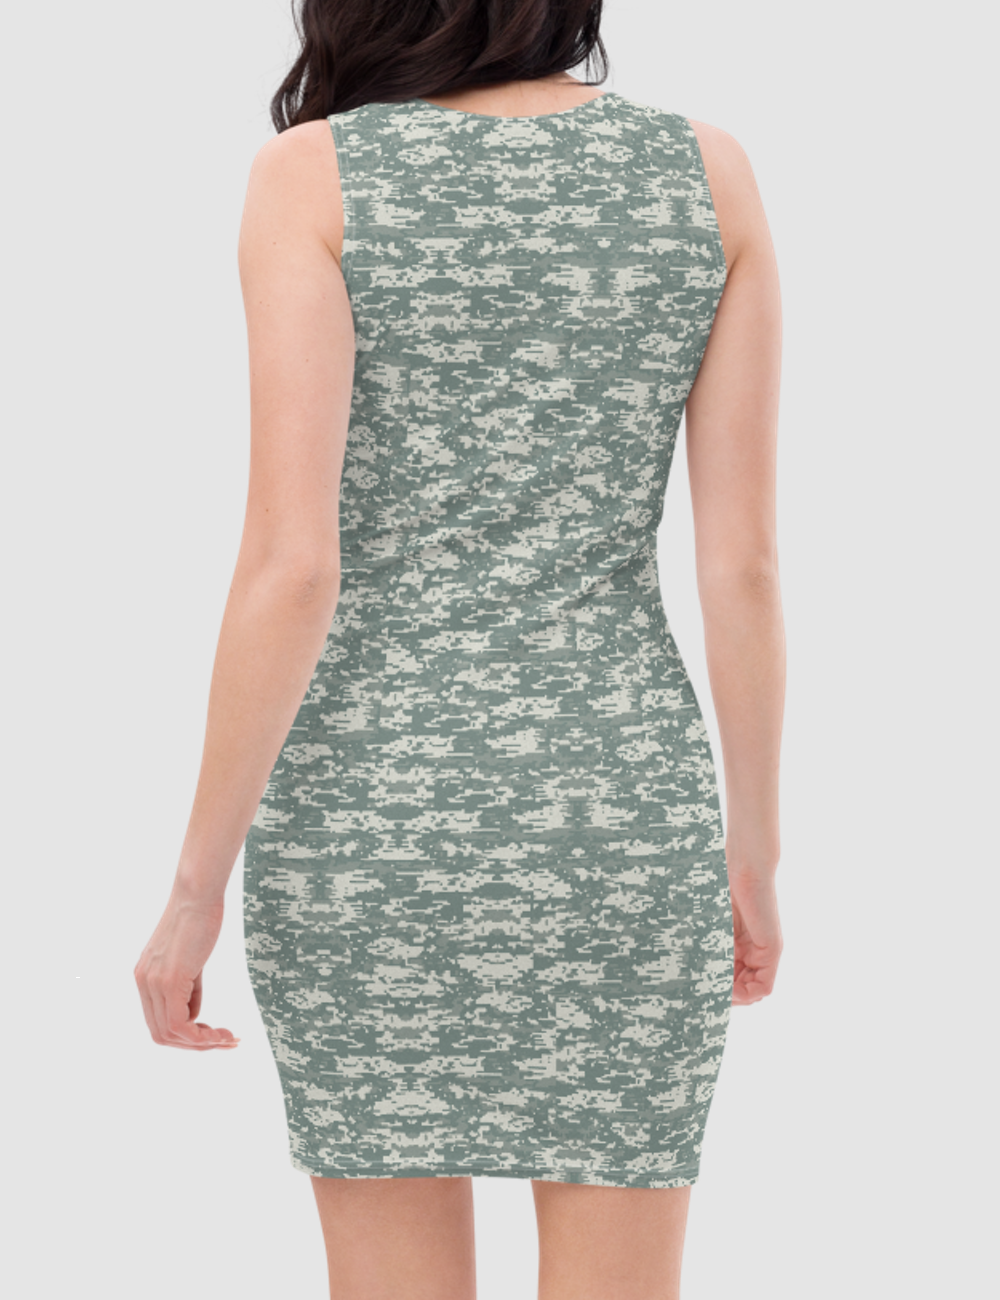 Digital Military Camouflage Print | Women's Sleeveless Fitted Sublimated Dress OniTakai